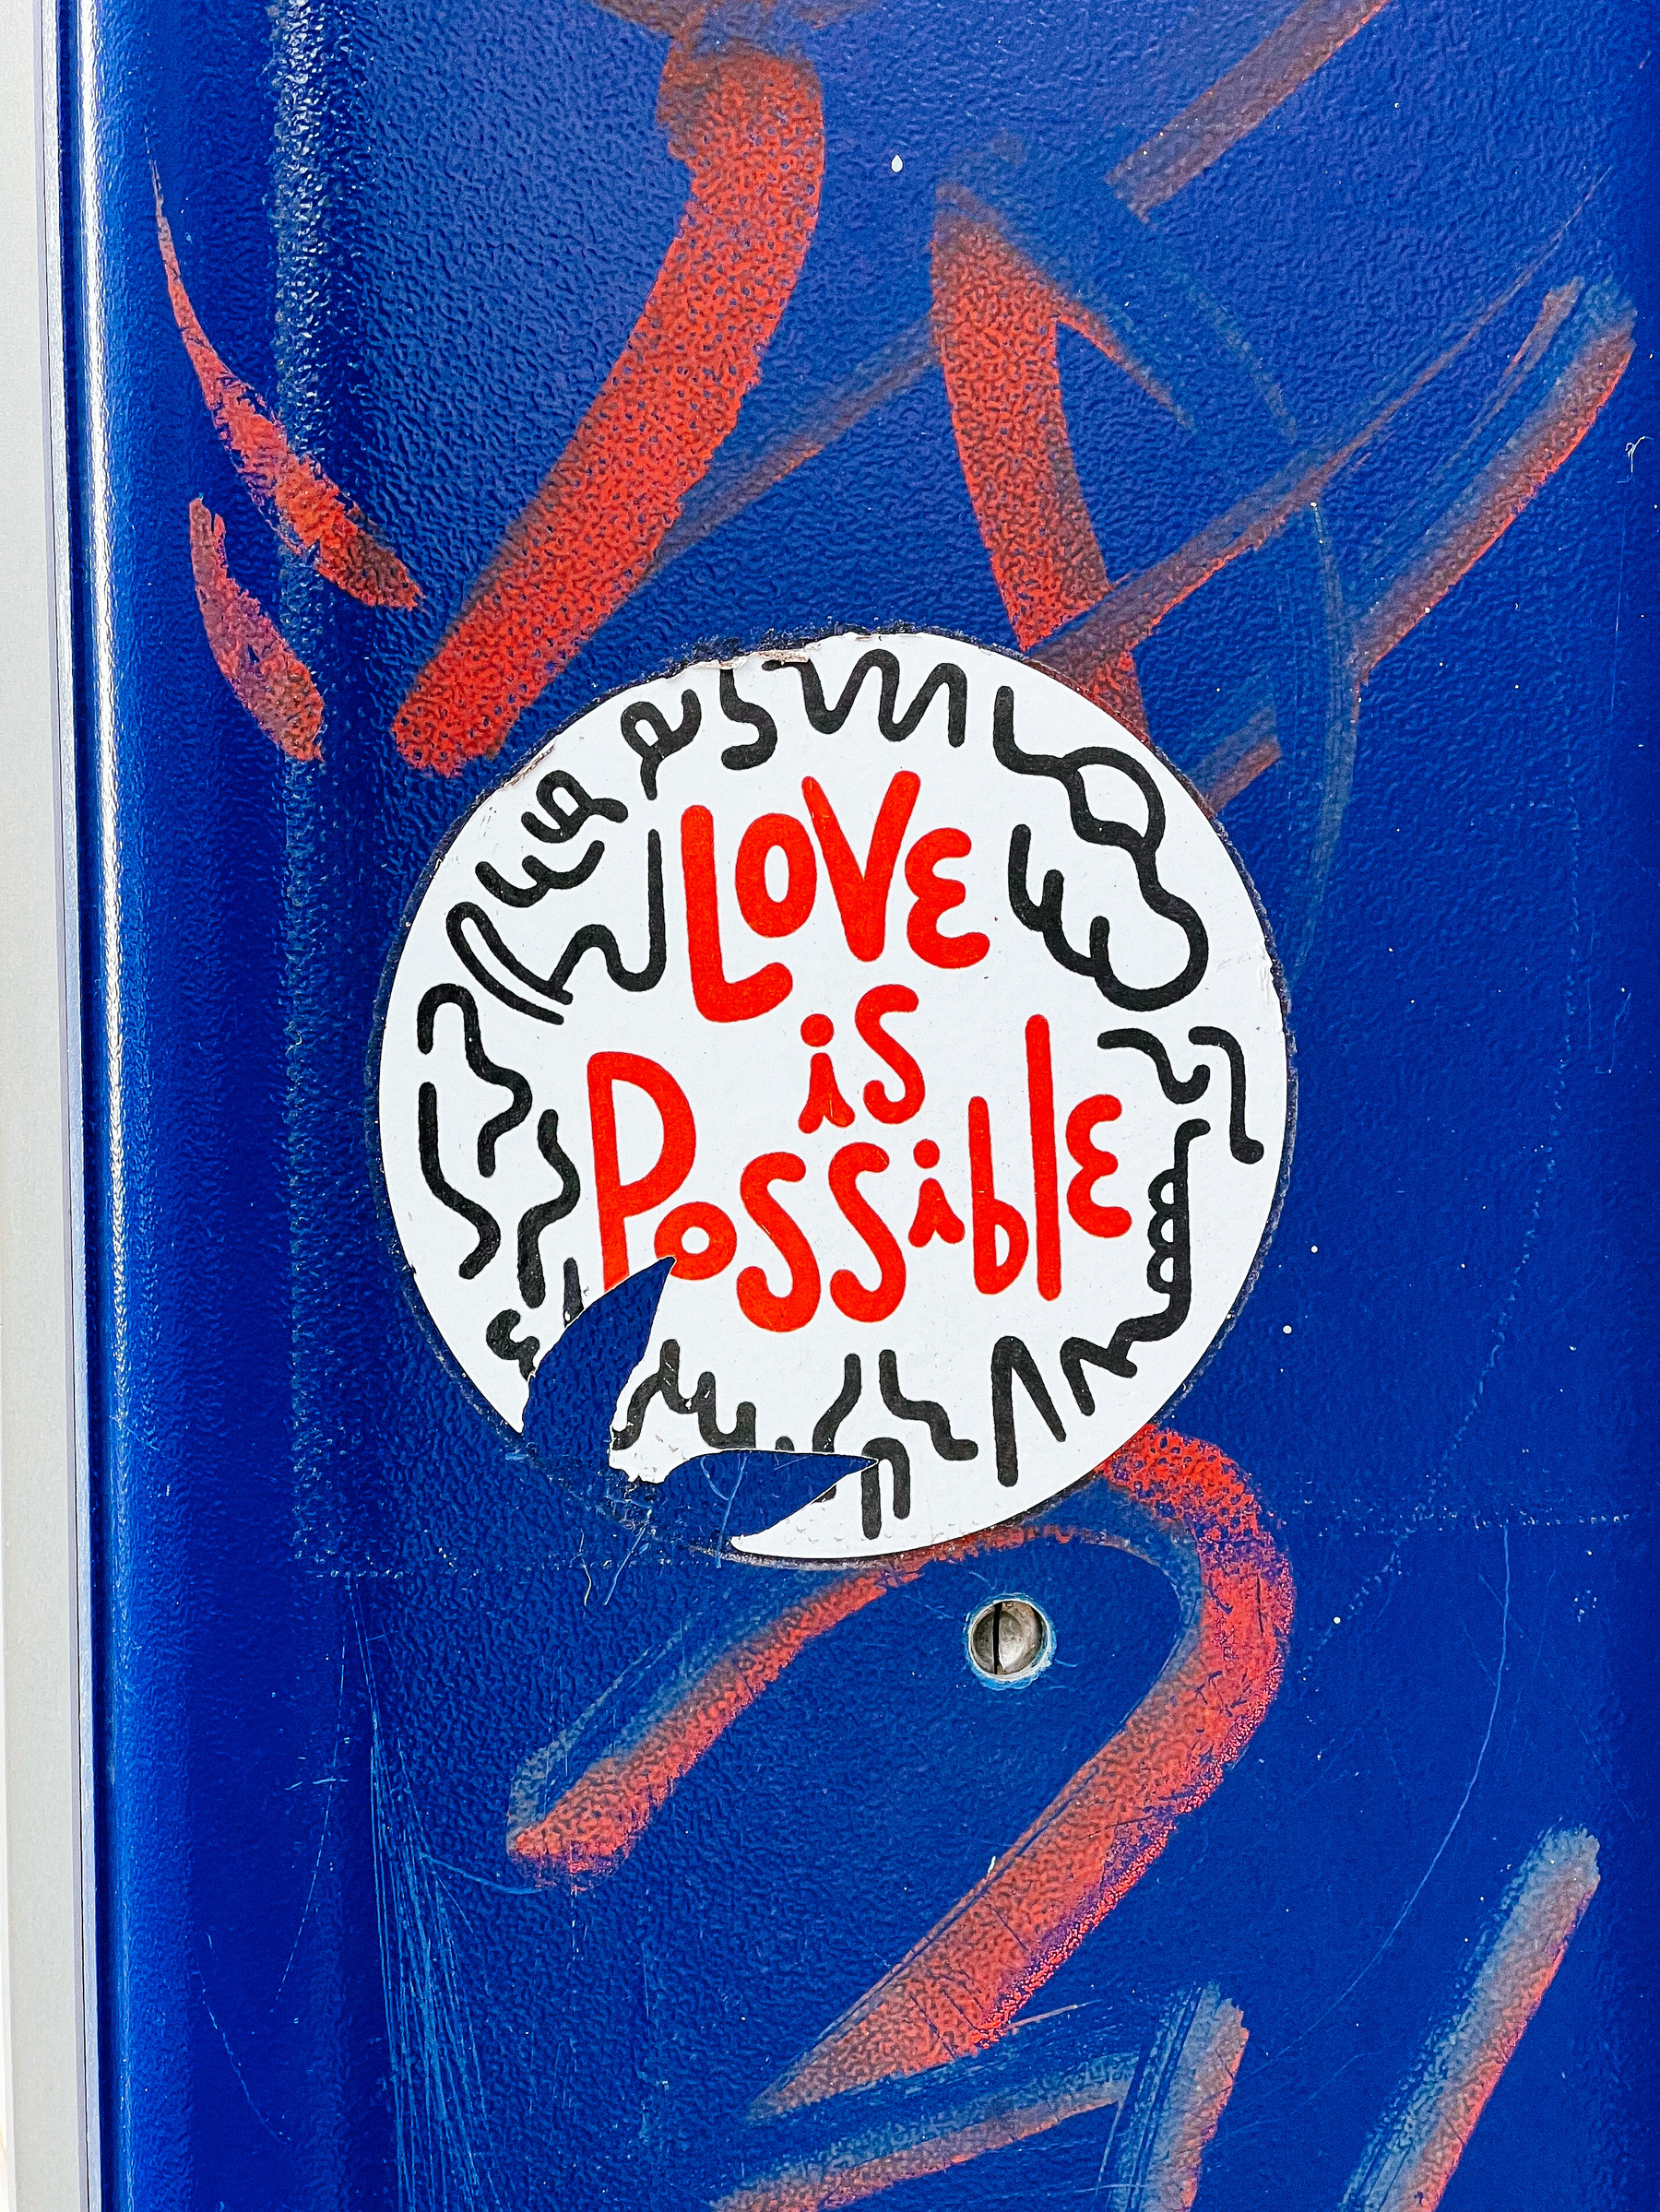 A sticker with the words “love is possible”